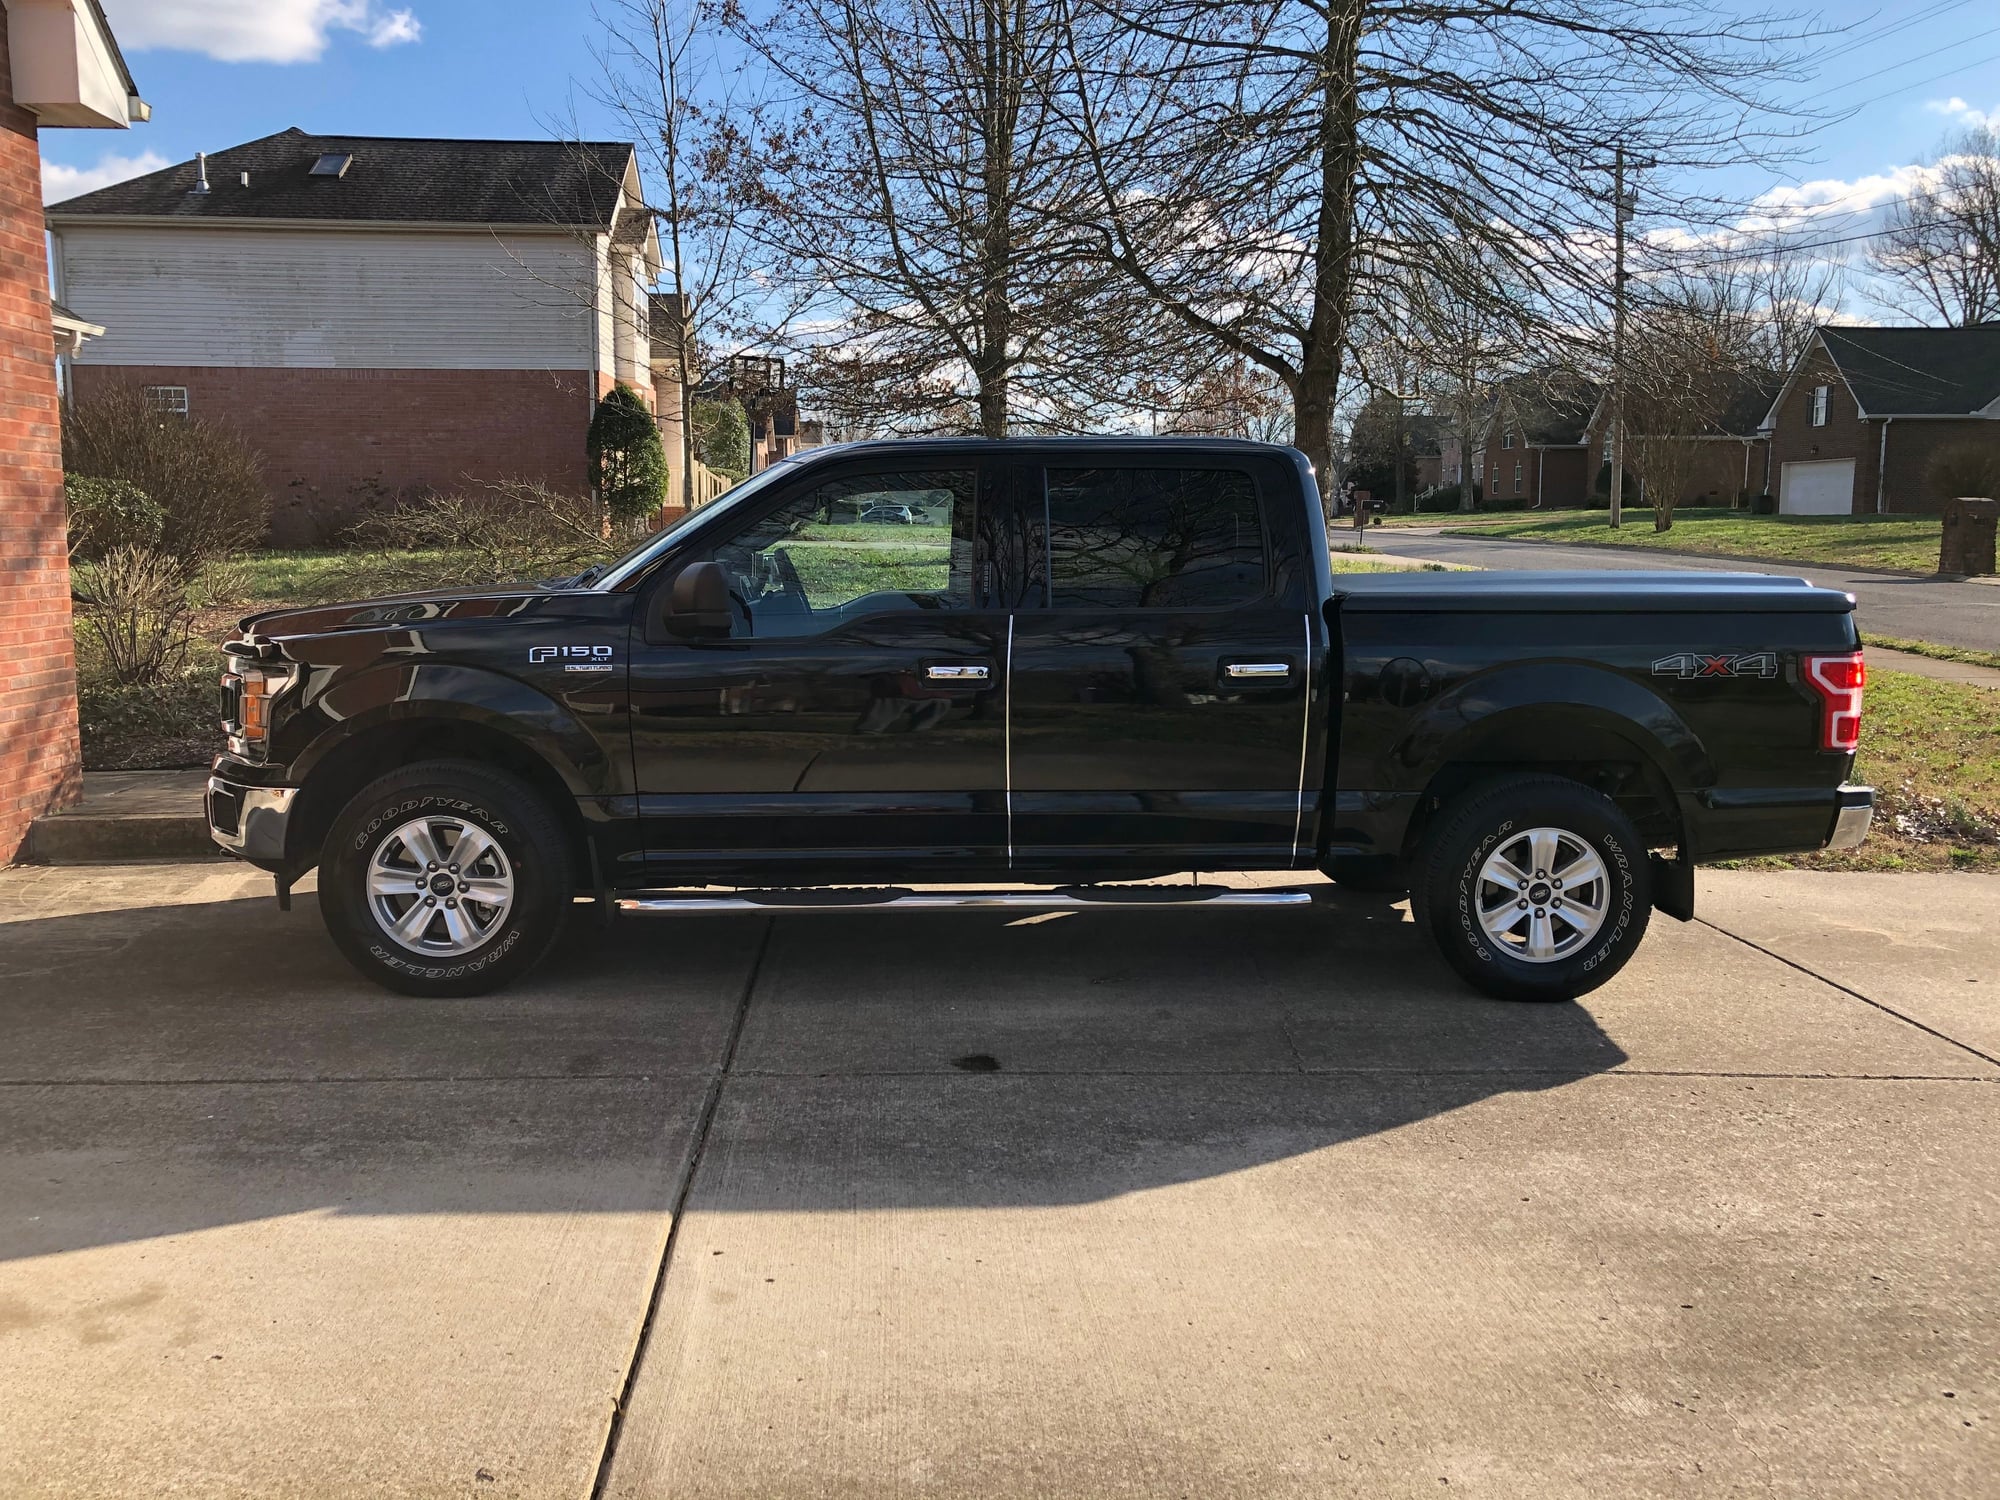 Meguiars Scratch X 2.0 - Ford F150 Forum - Community of Ford Truck Fans